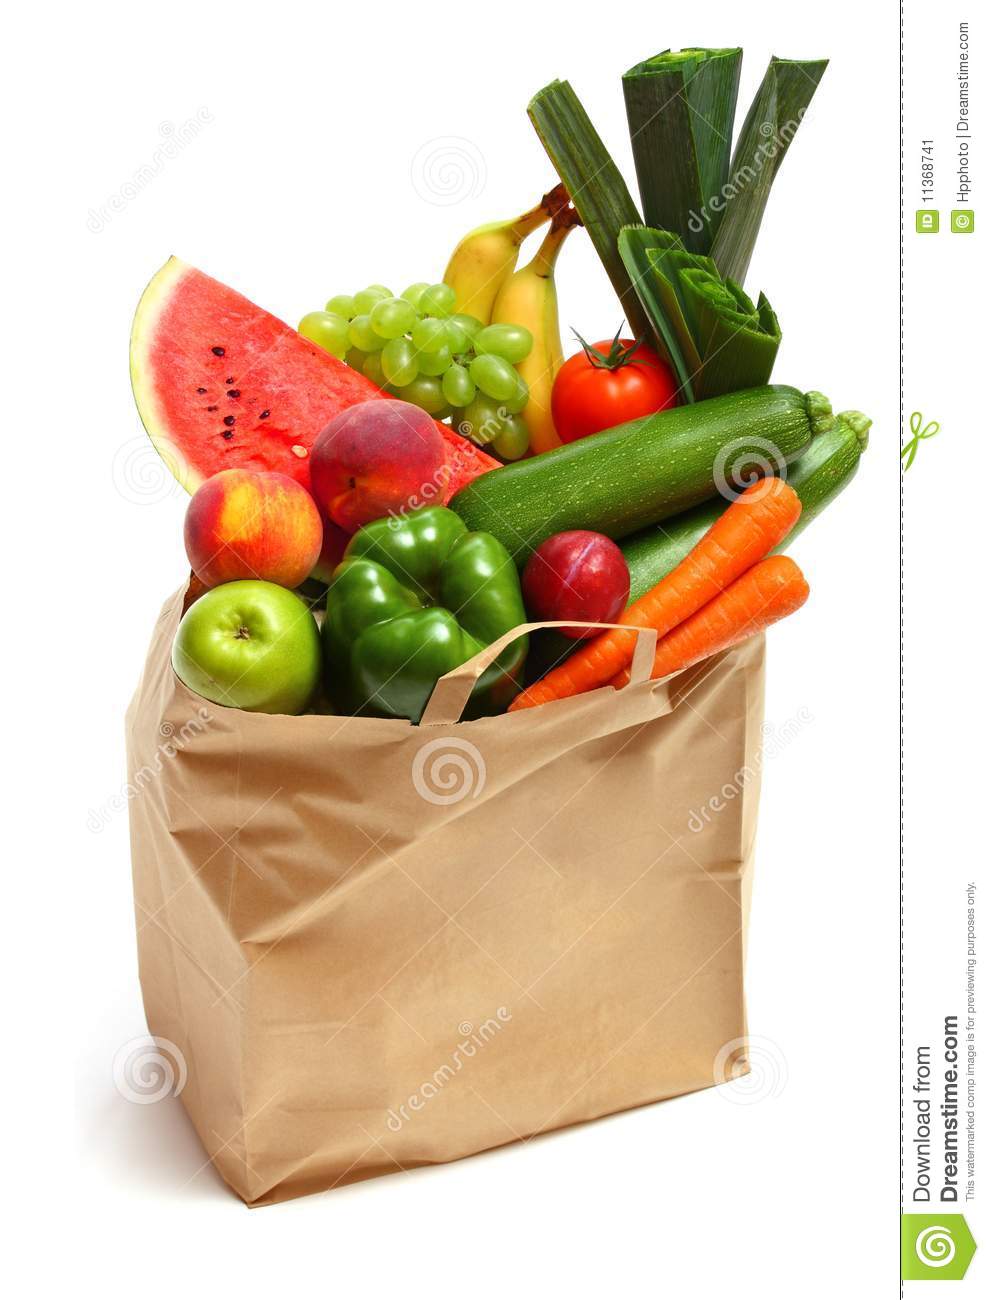 Bag Full Of Healthy Fruits And Vegetables Stock Image   Image    